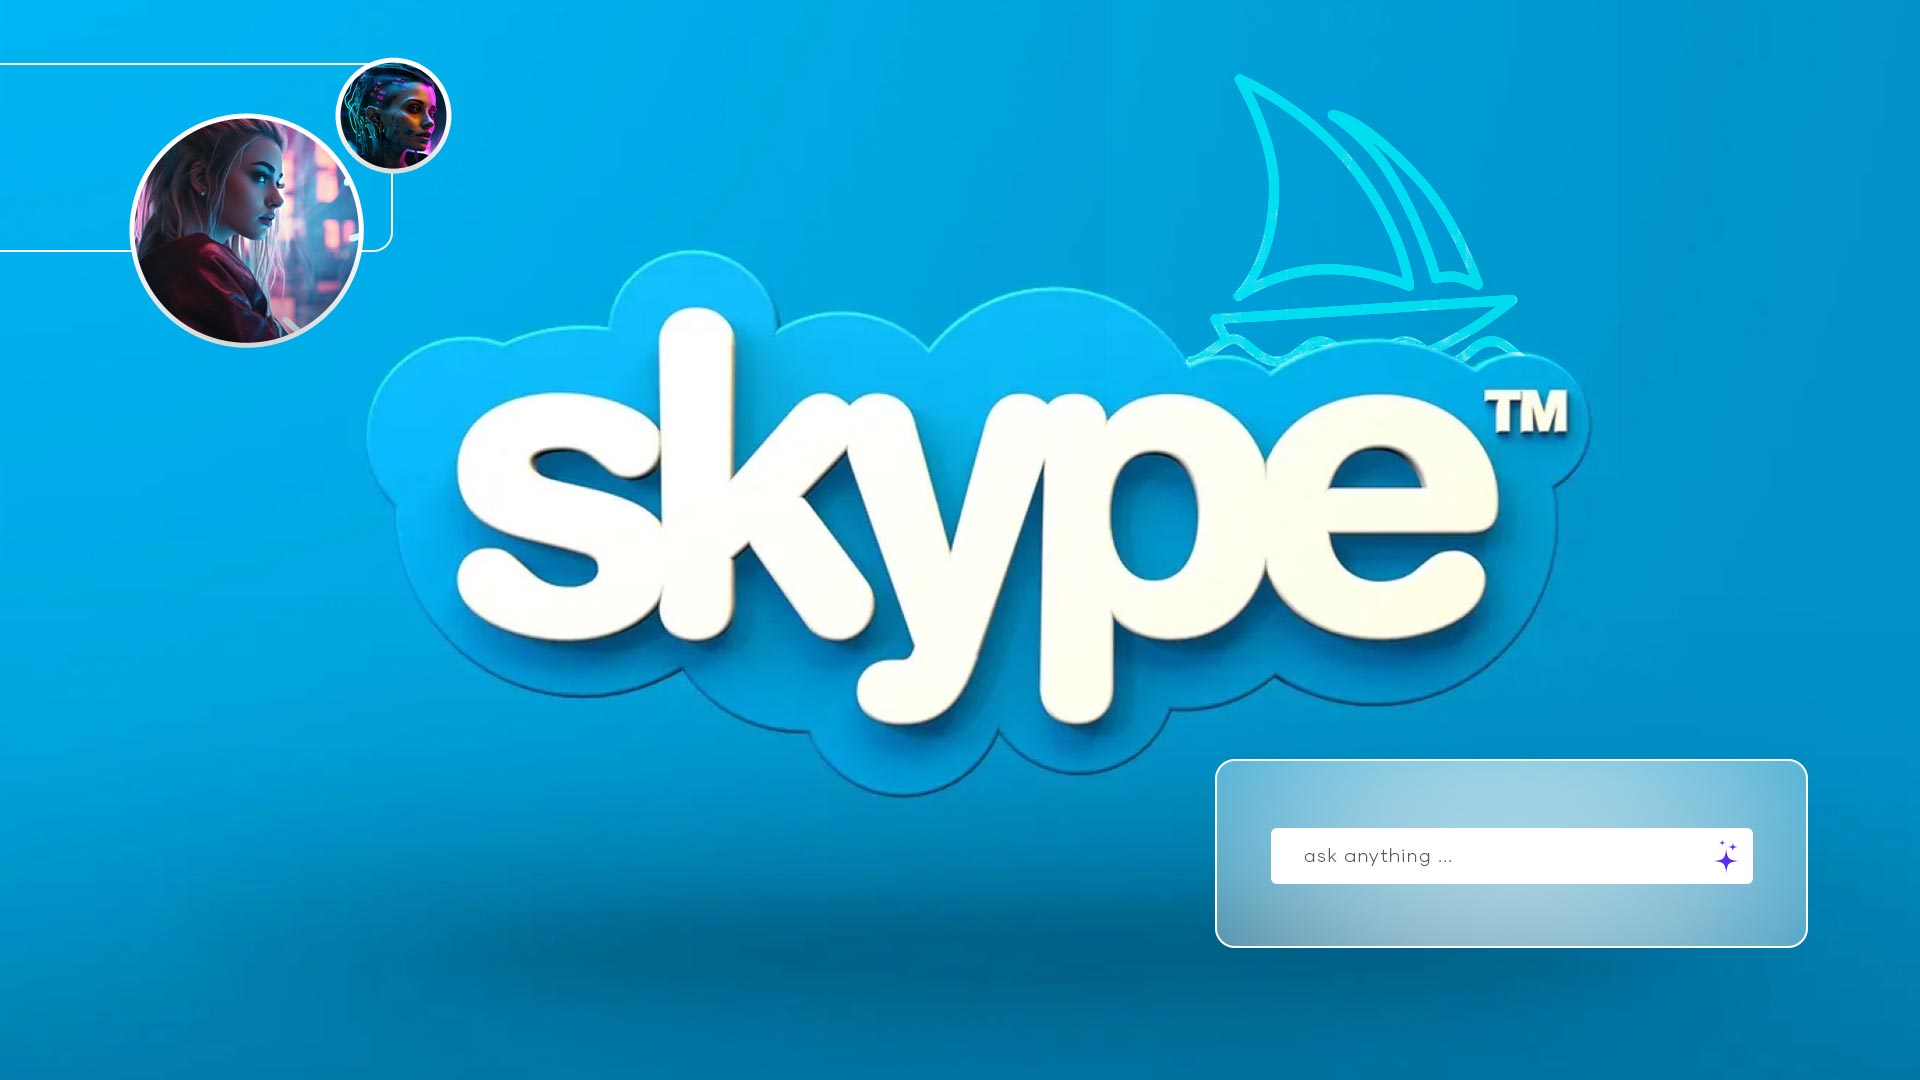 How skype is helping Graphic designers - MakePixelPerfect